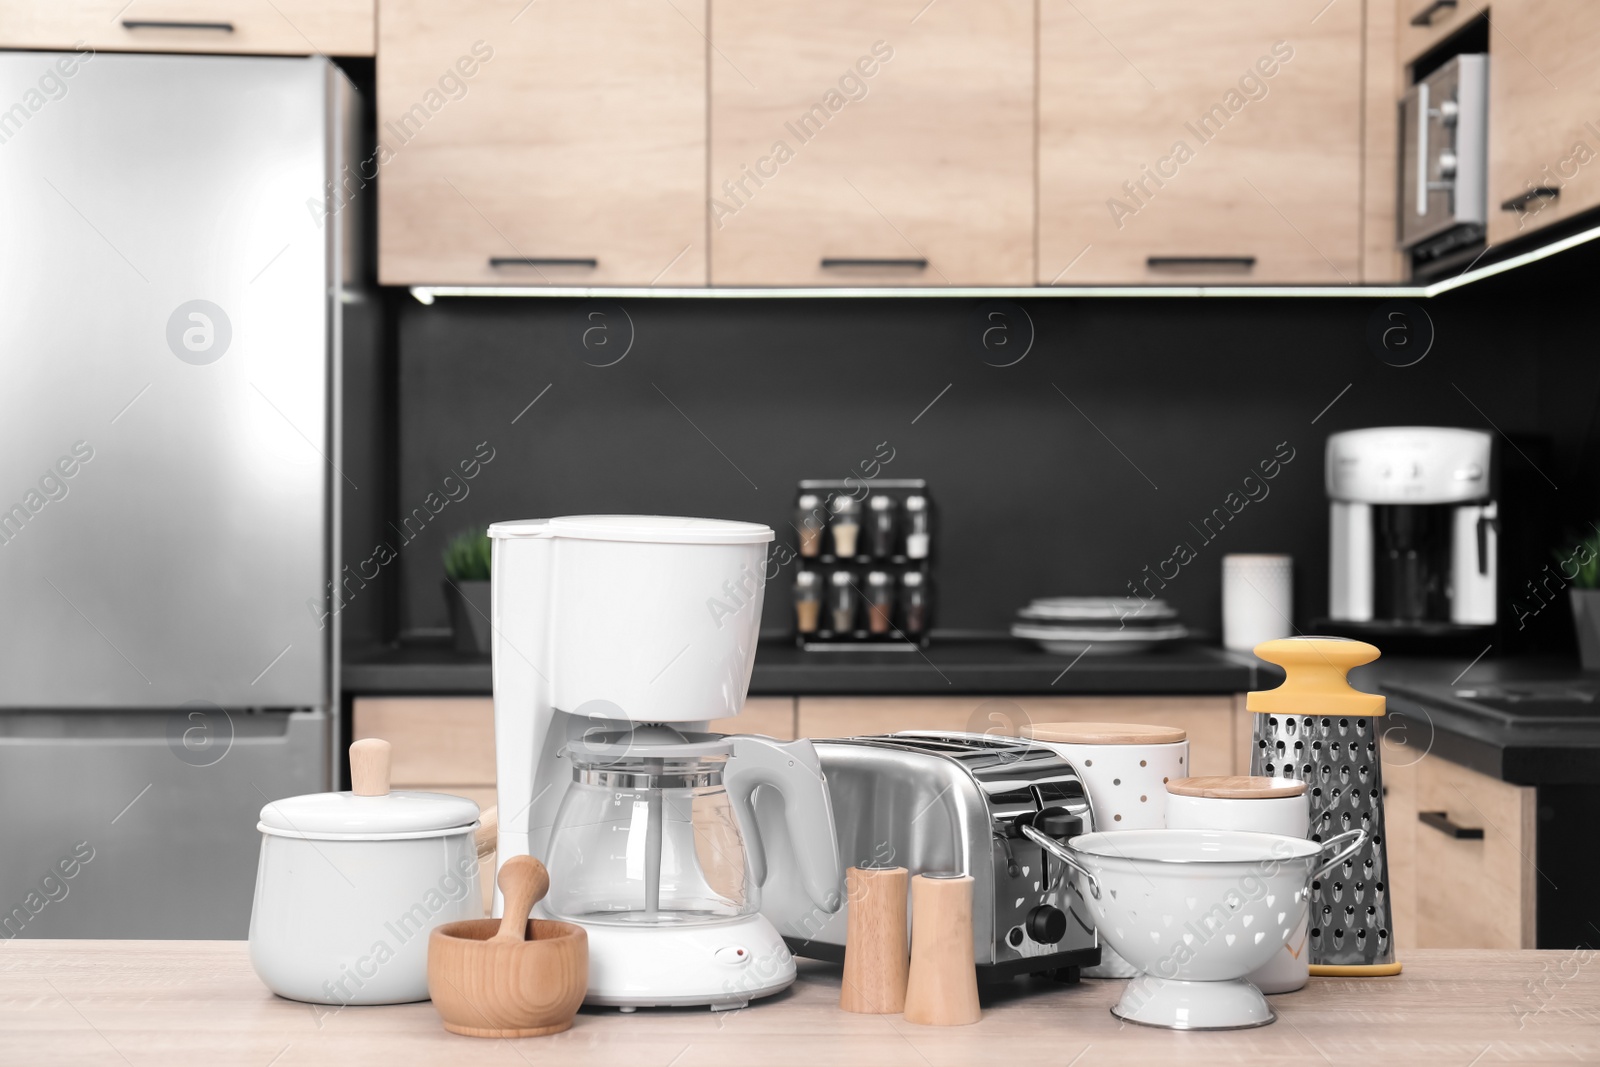 Photo of Set with modern domestic appliances in kitchen